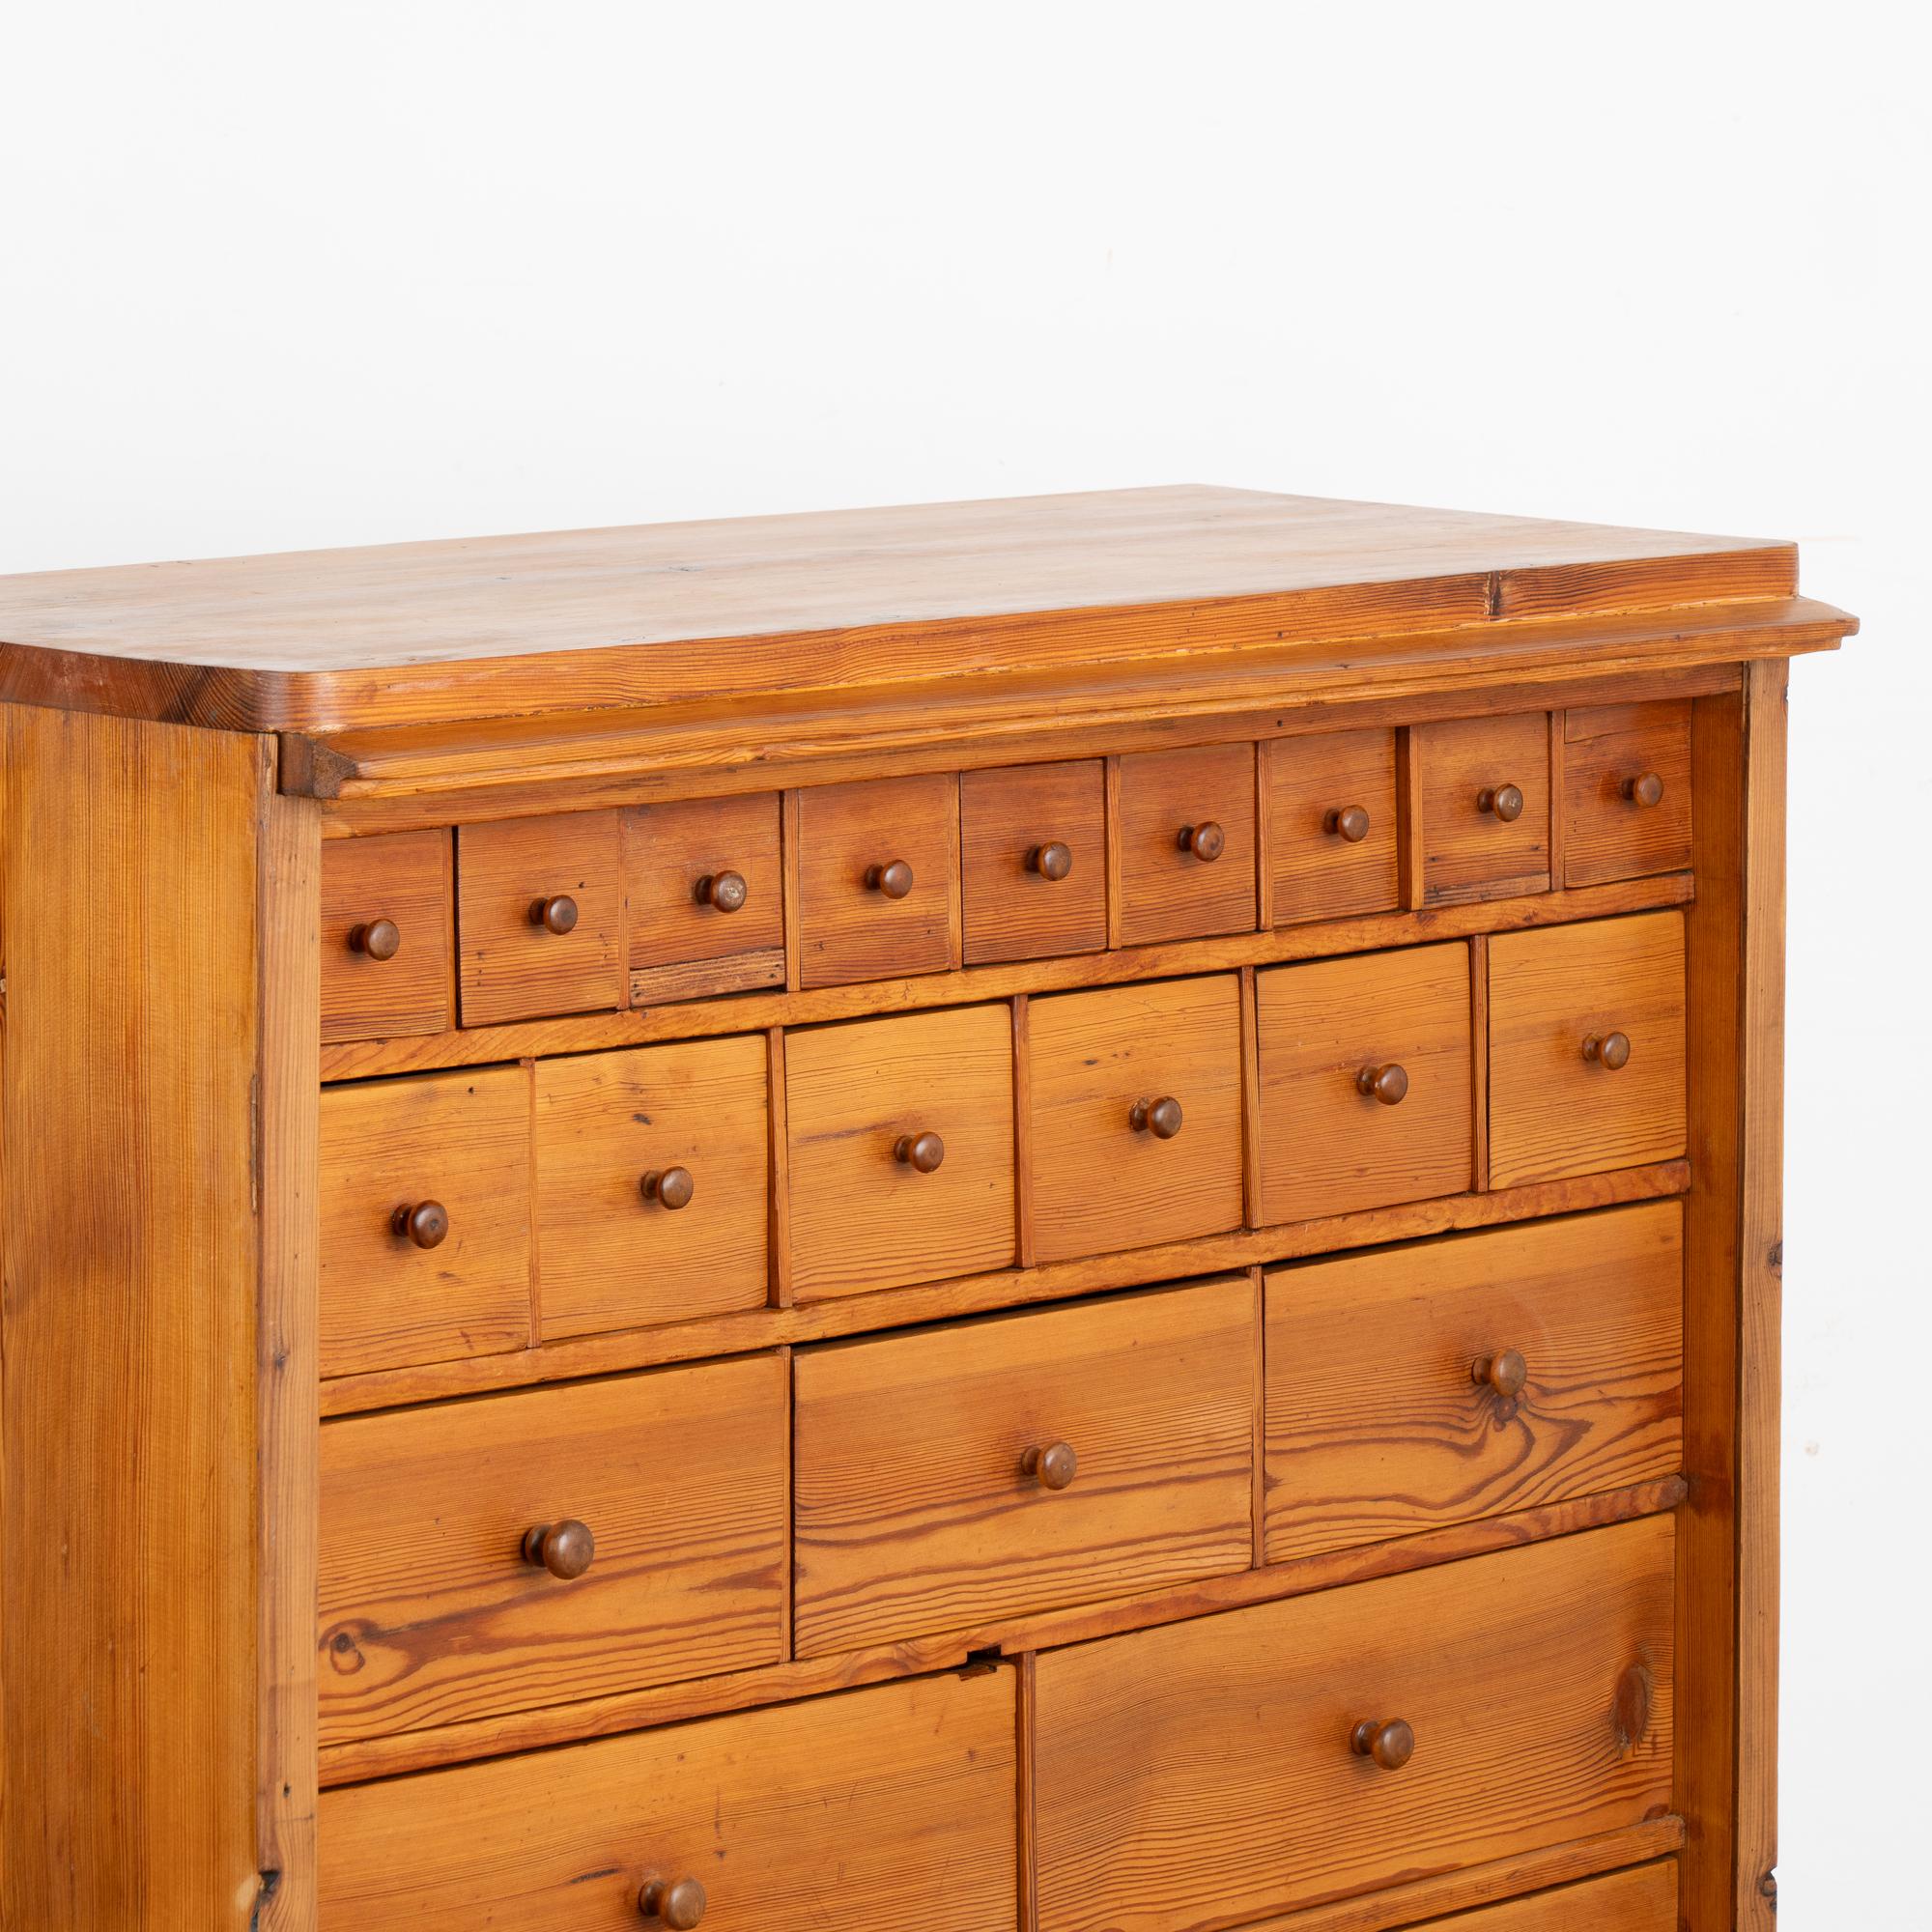 19th Century Pine Apothecary Chest of Drawers, Denmark circa 1890